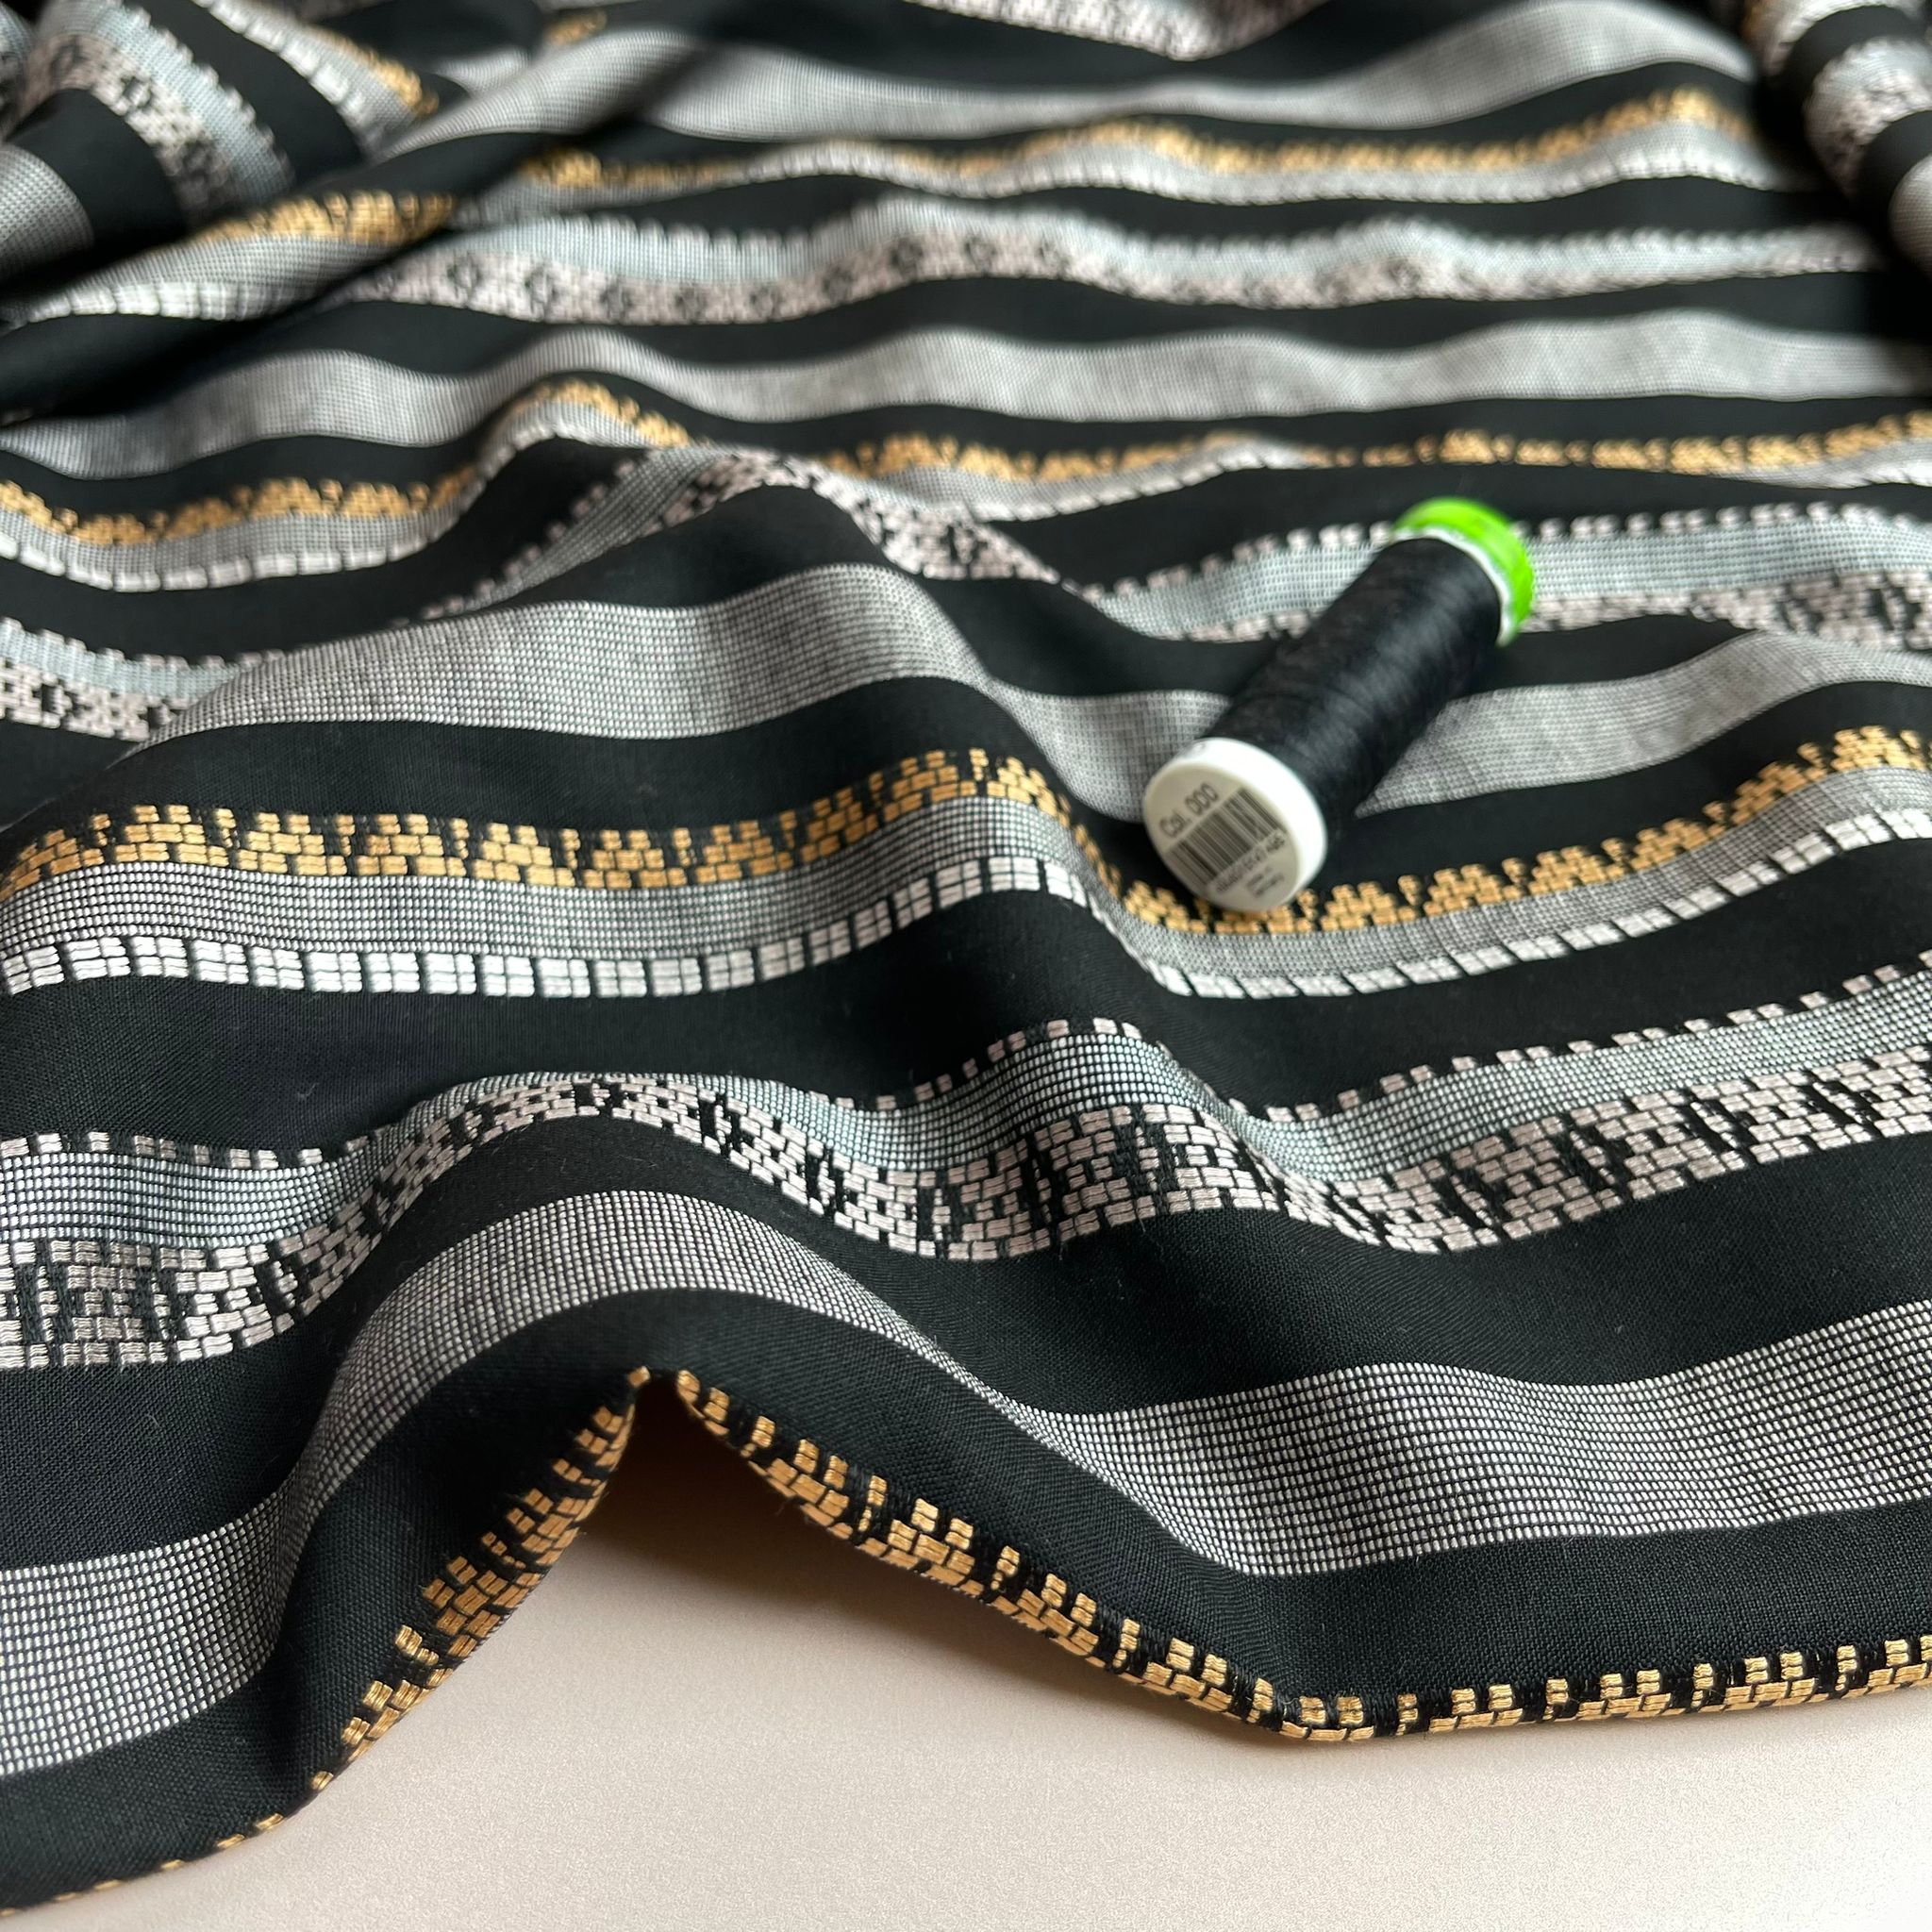 Yarn Dyed Embroidered Stripes on Black Viscose Fabric